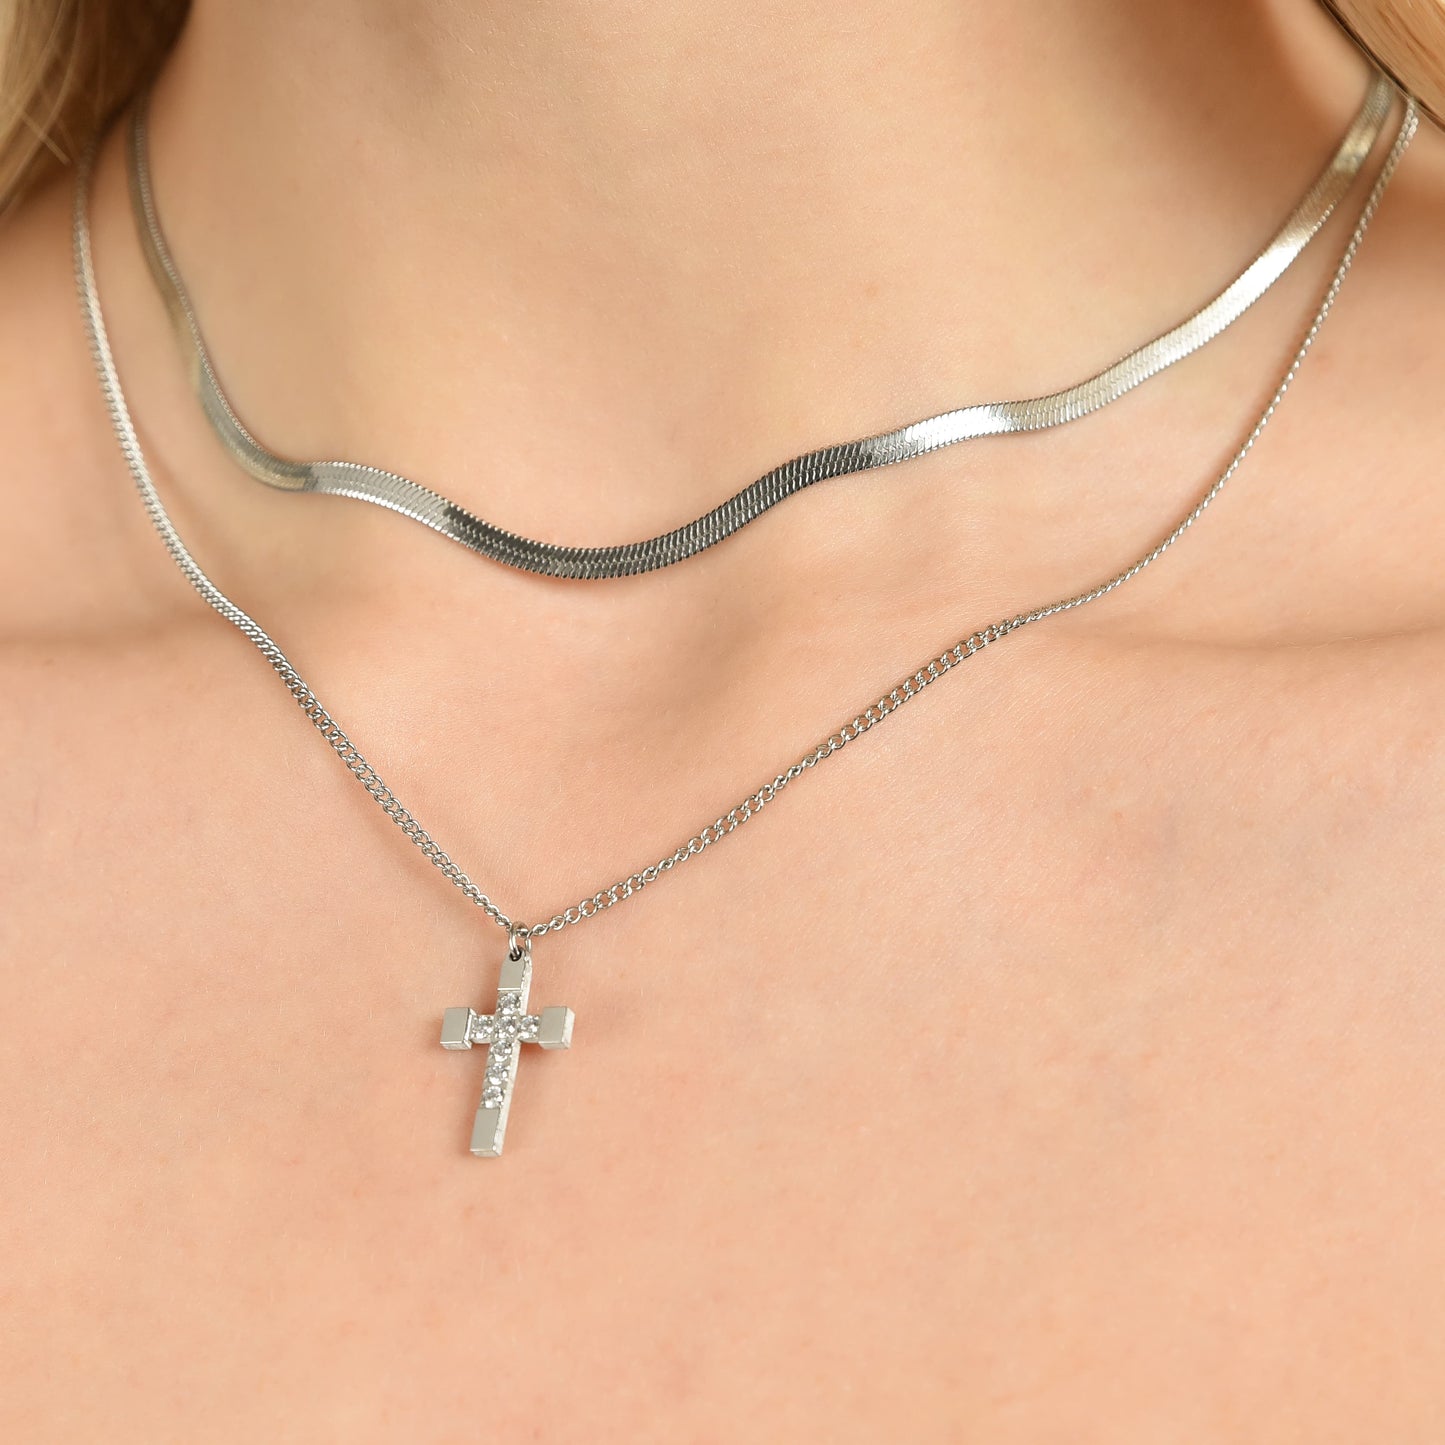 WOMAN'S NECKLACE IN STEEL WITH CROSS WITH WHITE CRYSTALS Luca Barra